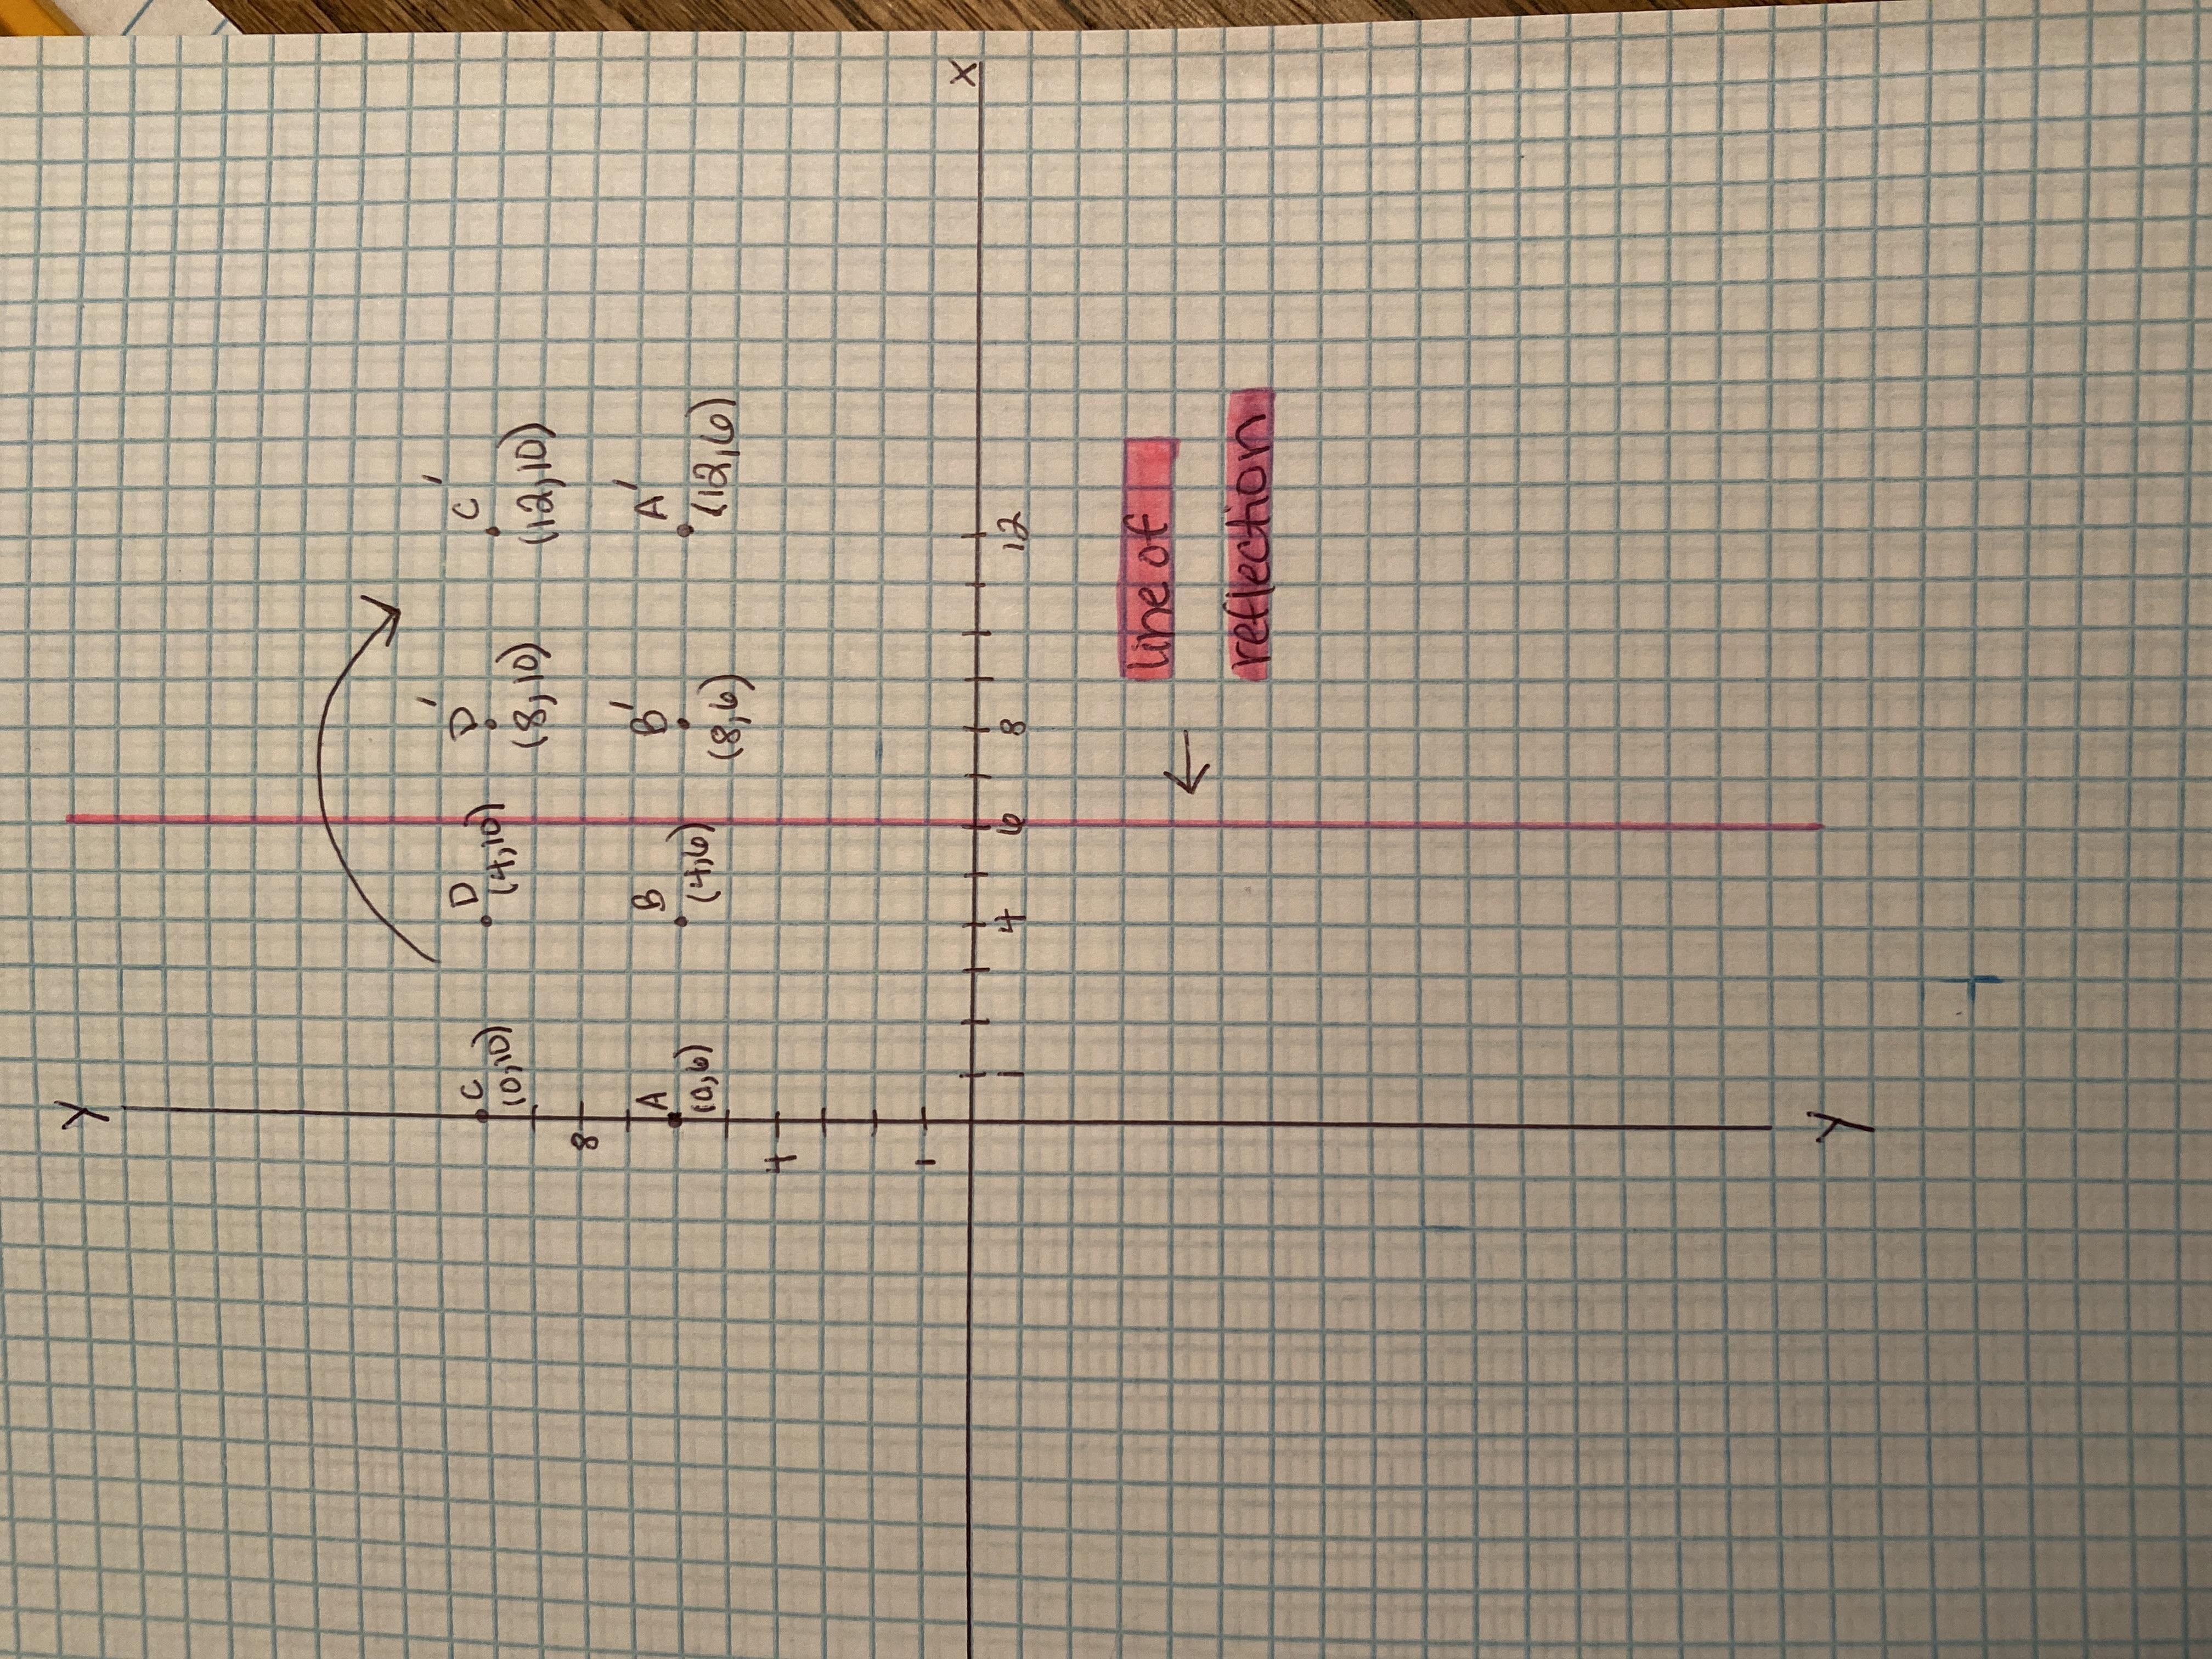 Draw A Square ABCD With A(0,6), B(4,6), C(0,10), And D(4,10) Reflect It On The Vertical Line Through